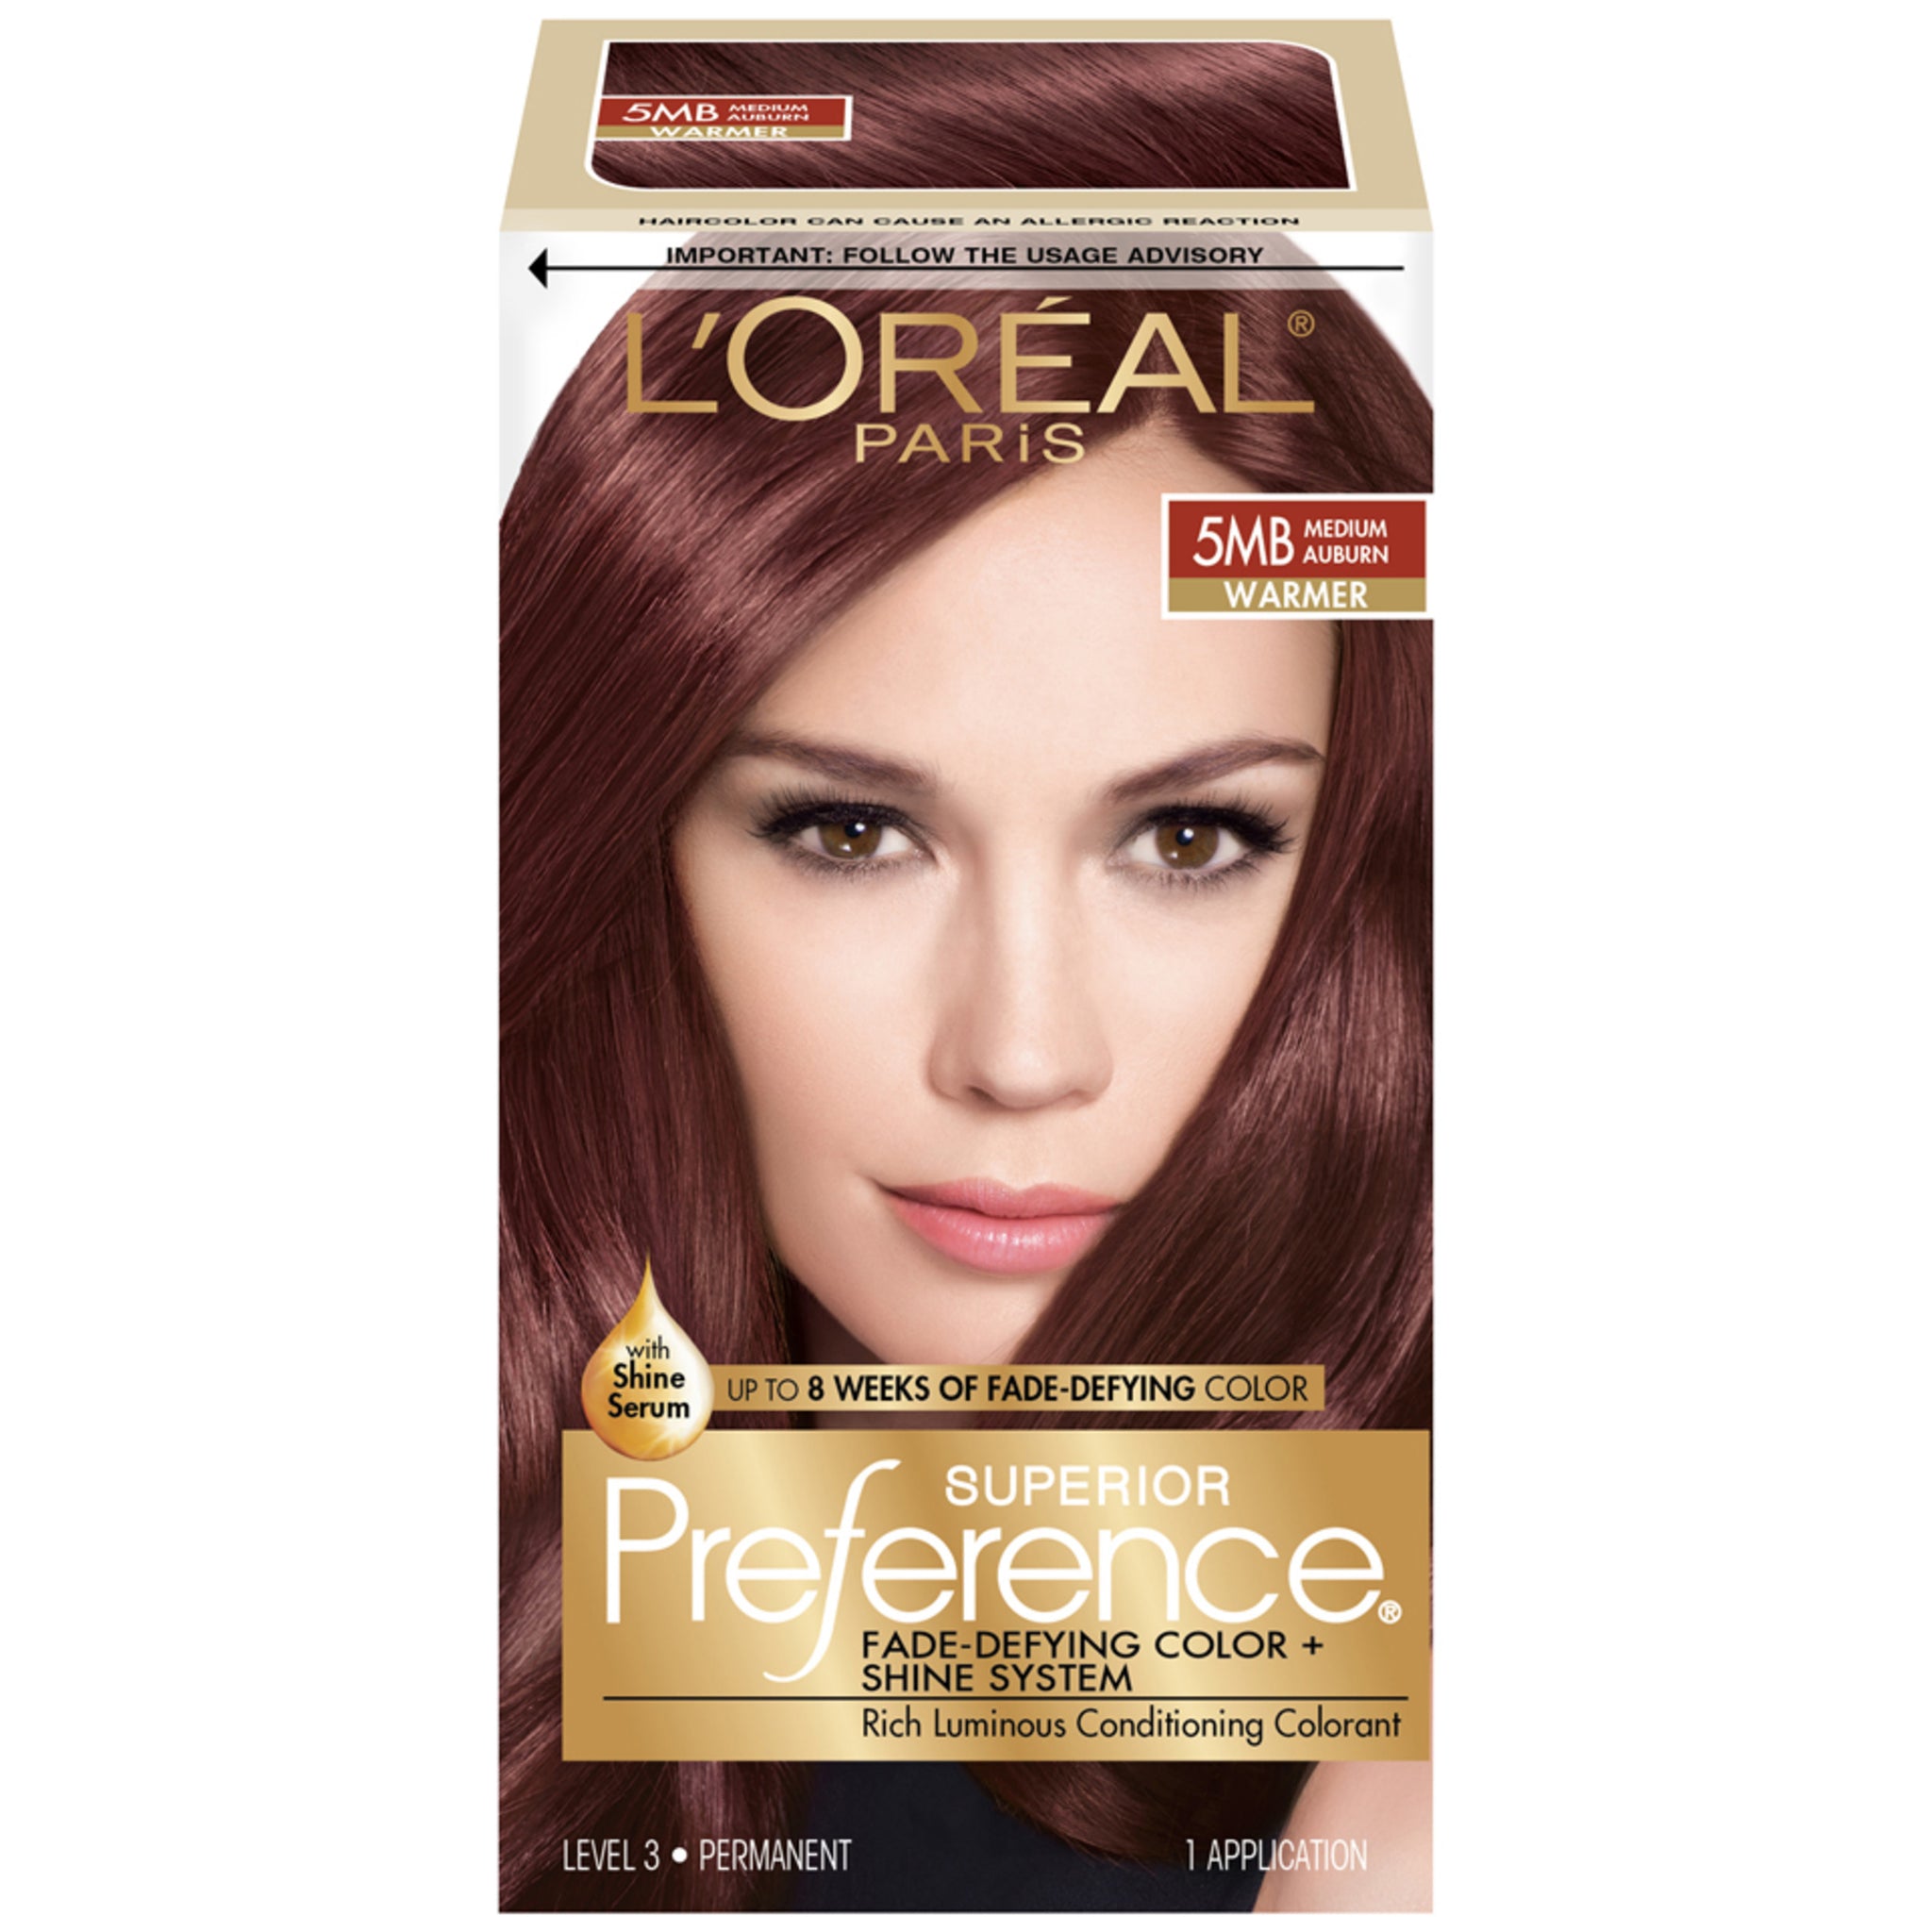 Superior Preference Fade-Defying Shine Permanent Hair Color